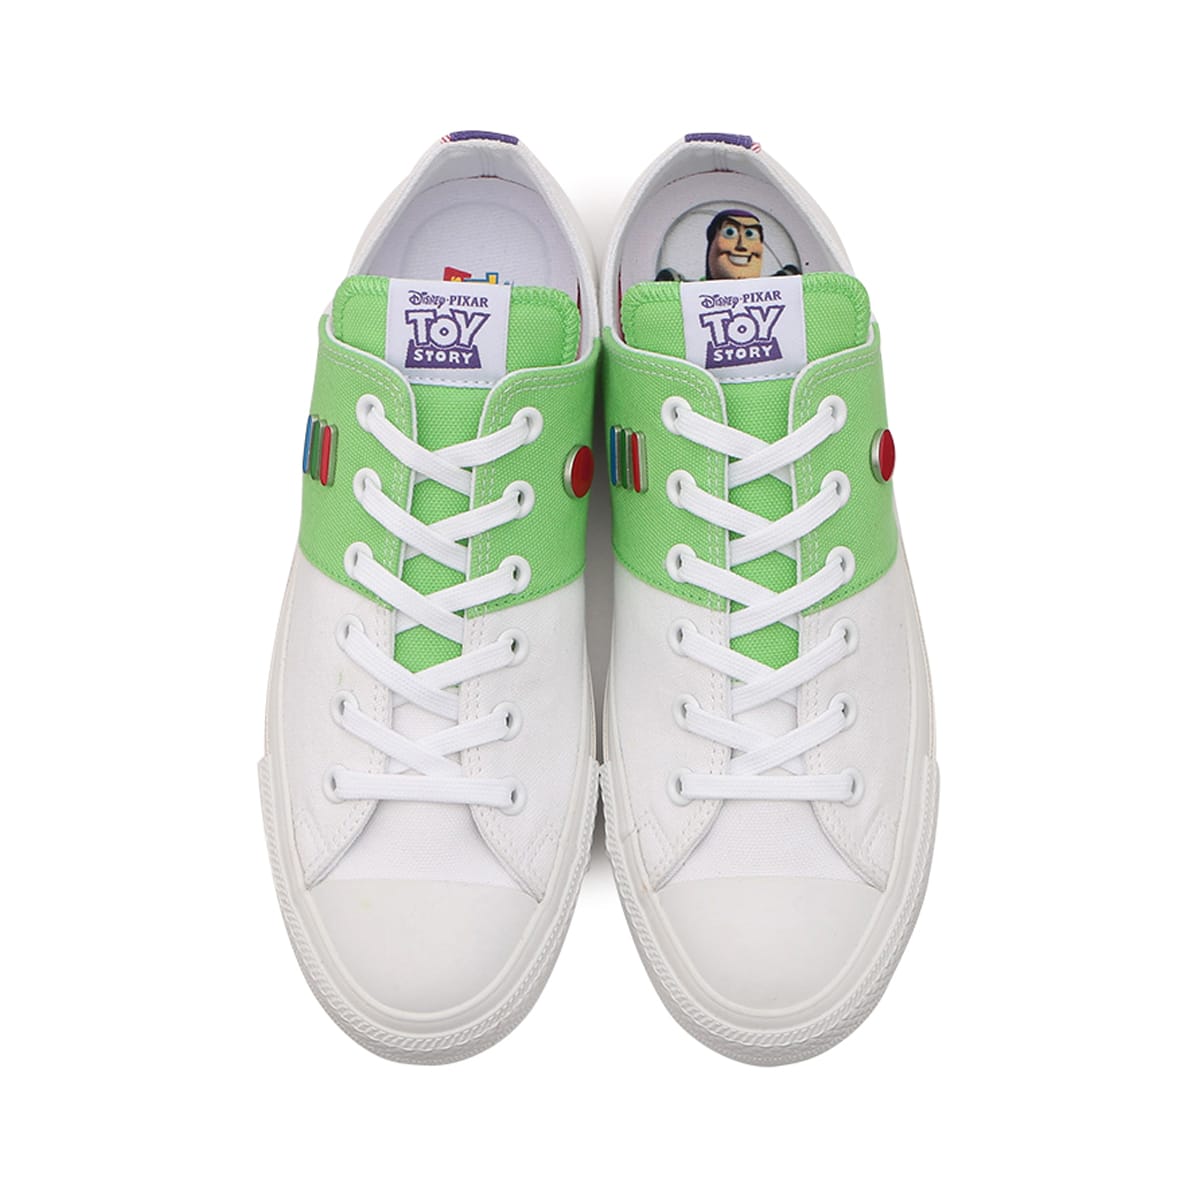 Toy Story x Converse Chuck Taylor All Star Low 32862650 3